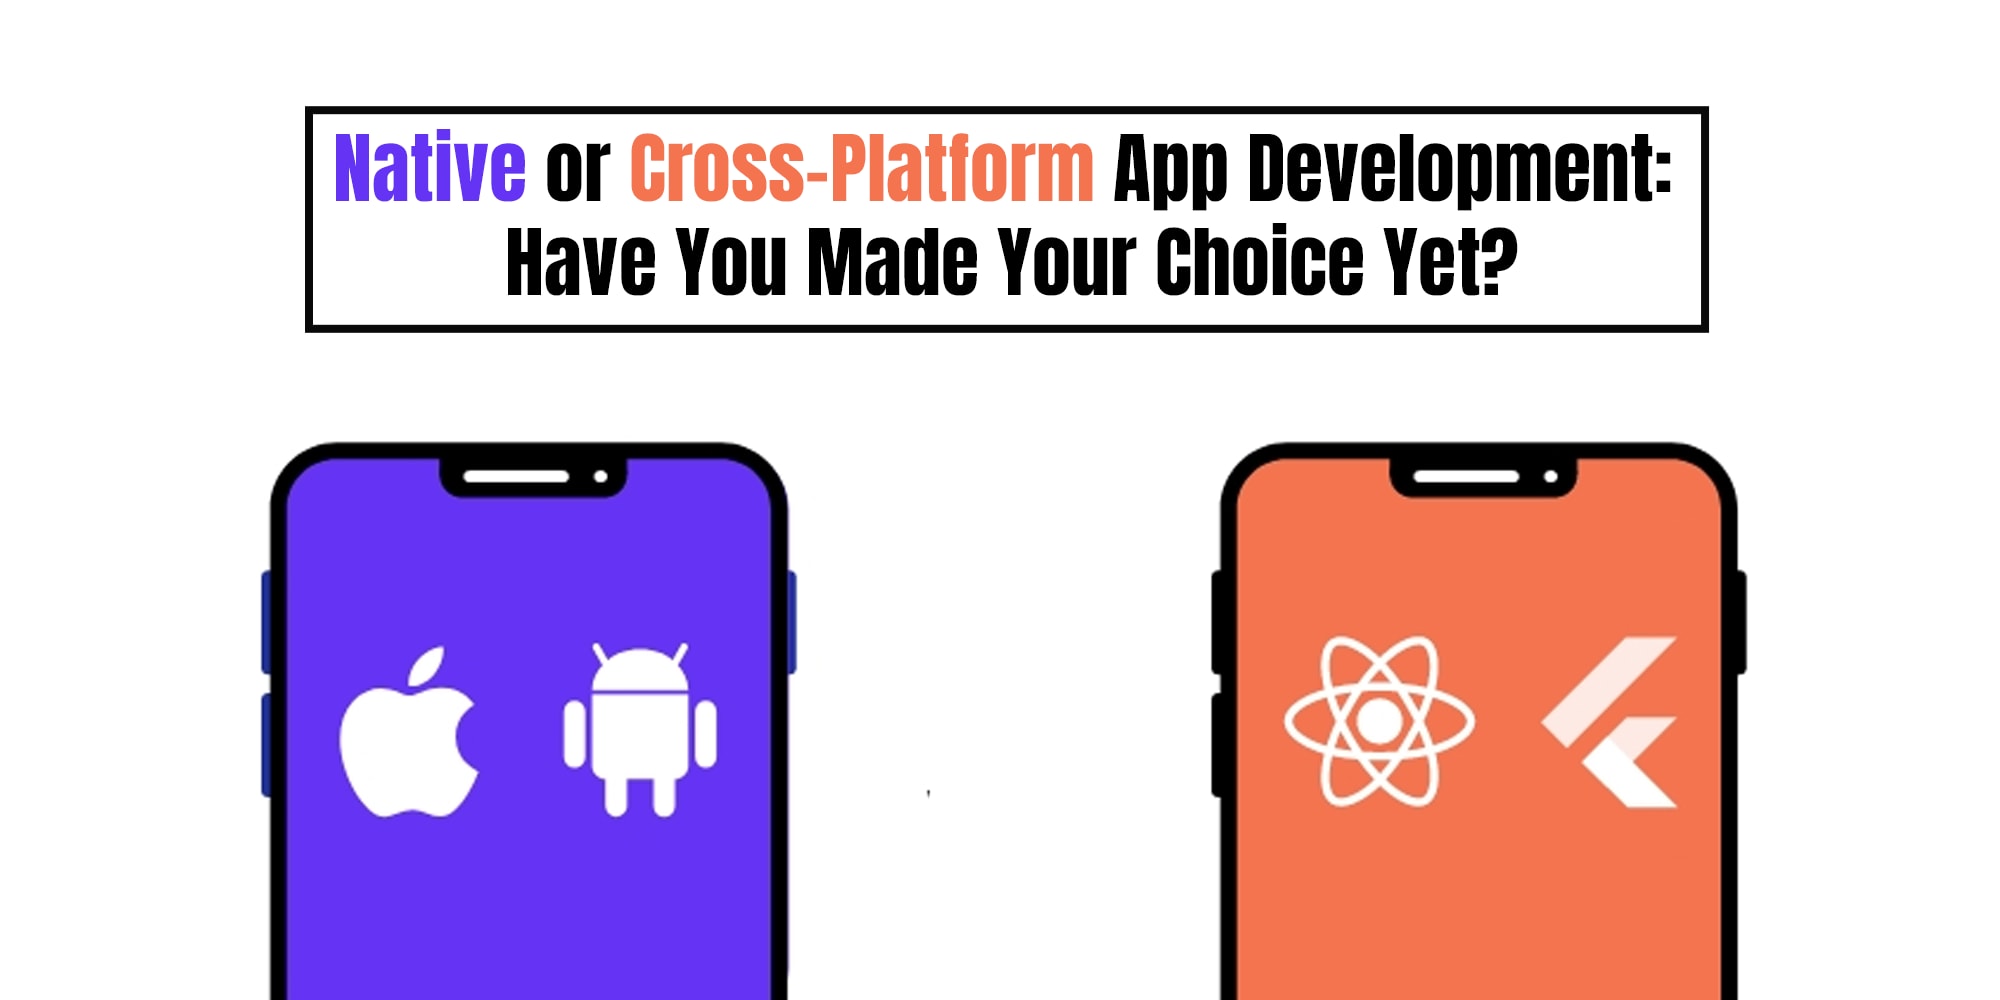 Native or Cross-Platform App Development: Have You Made Your Choice Yet?